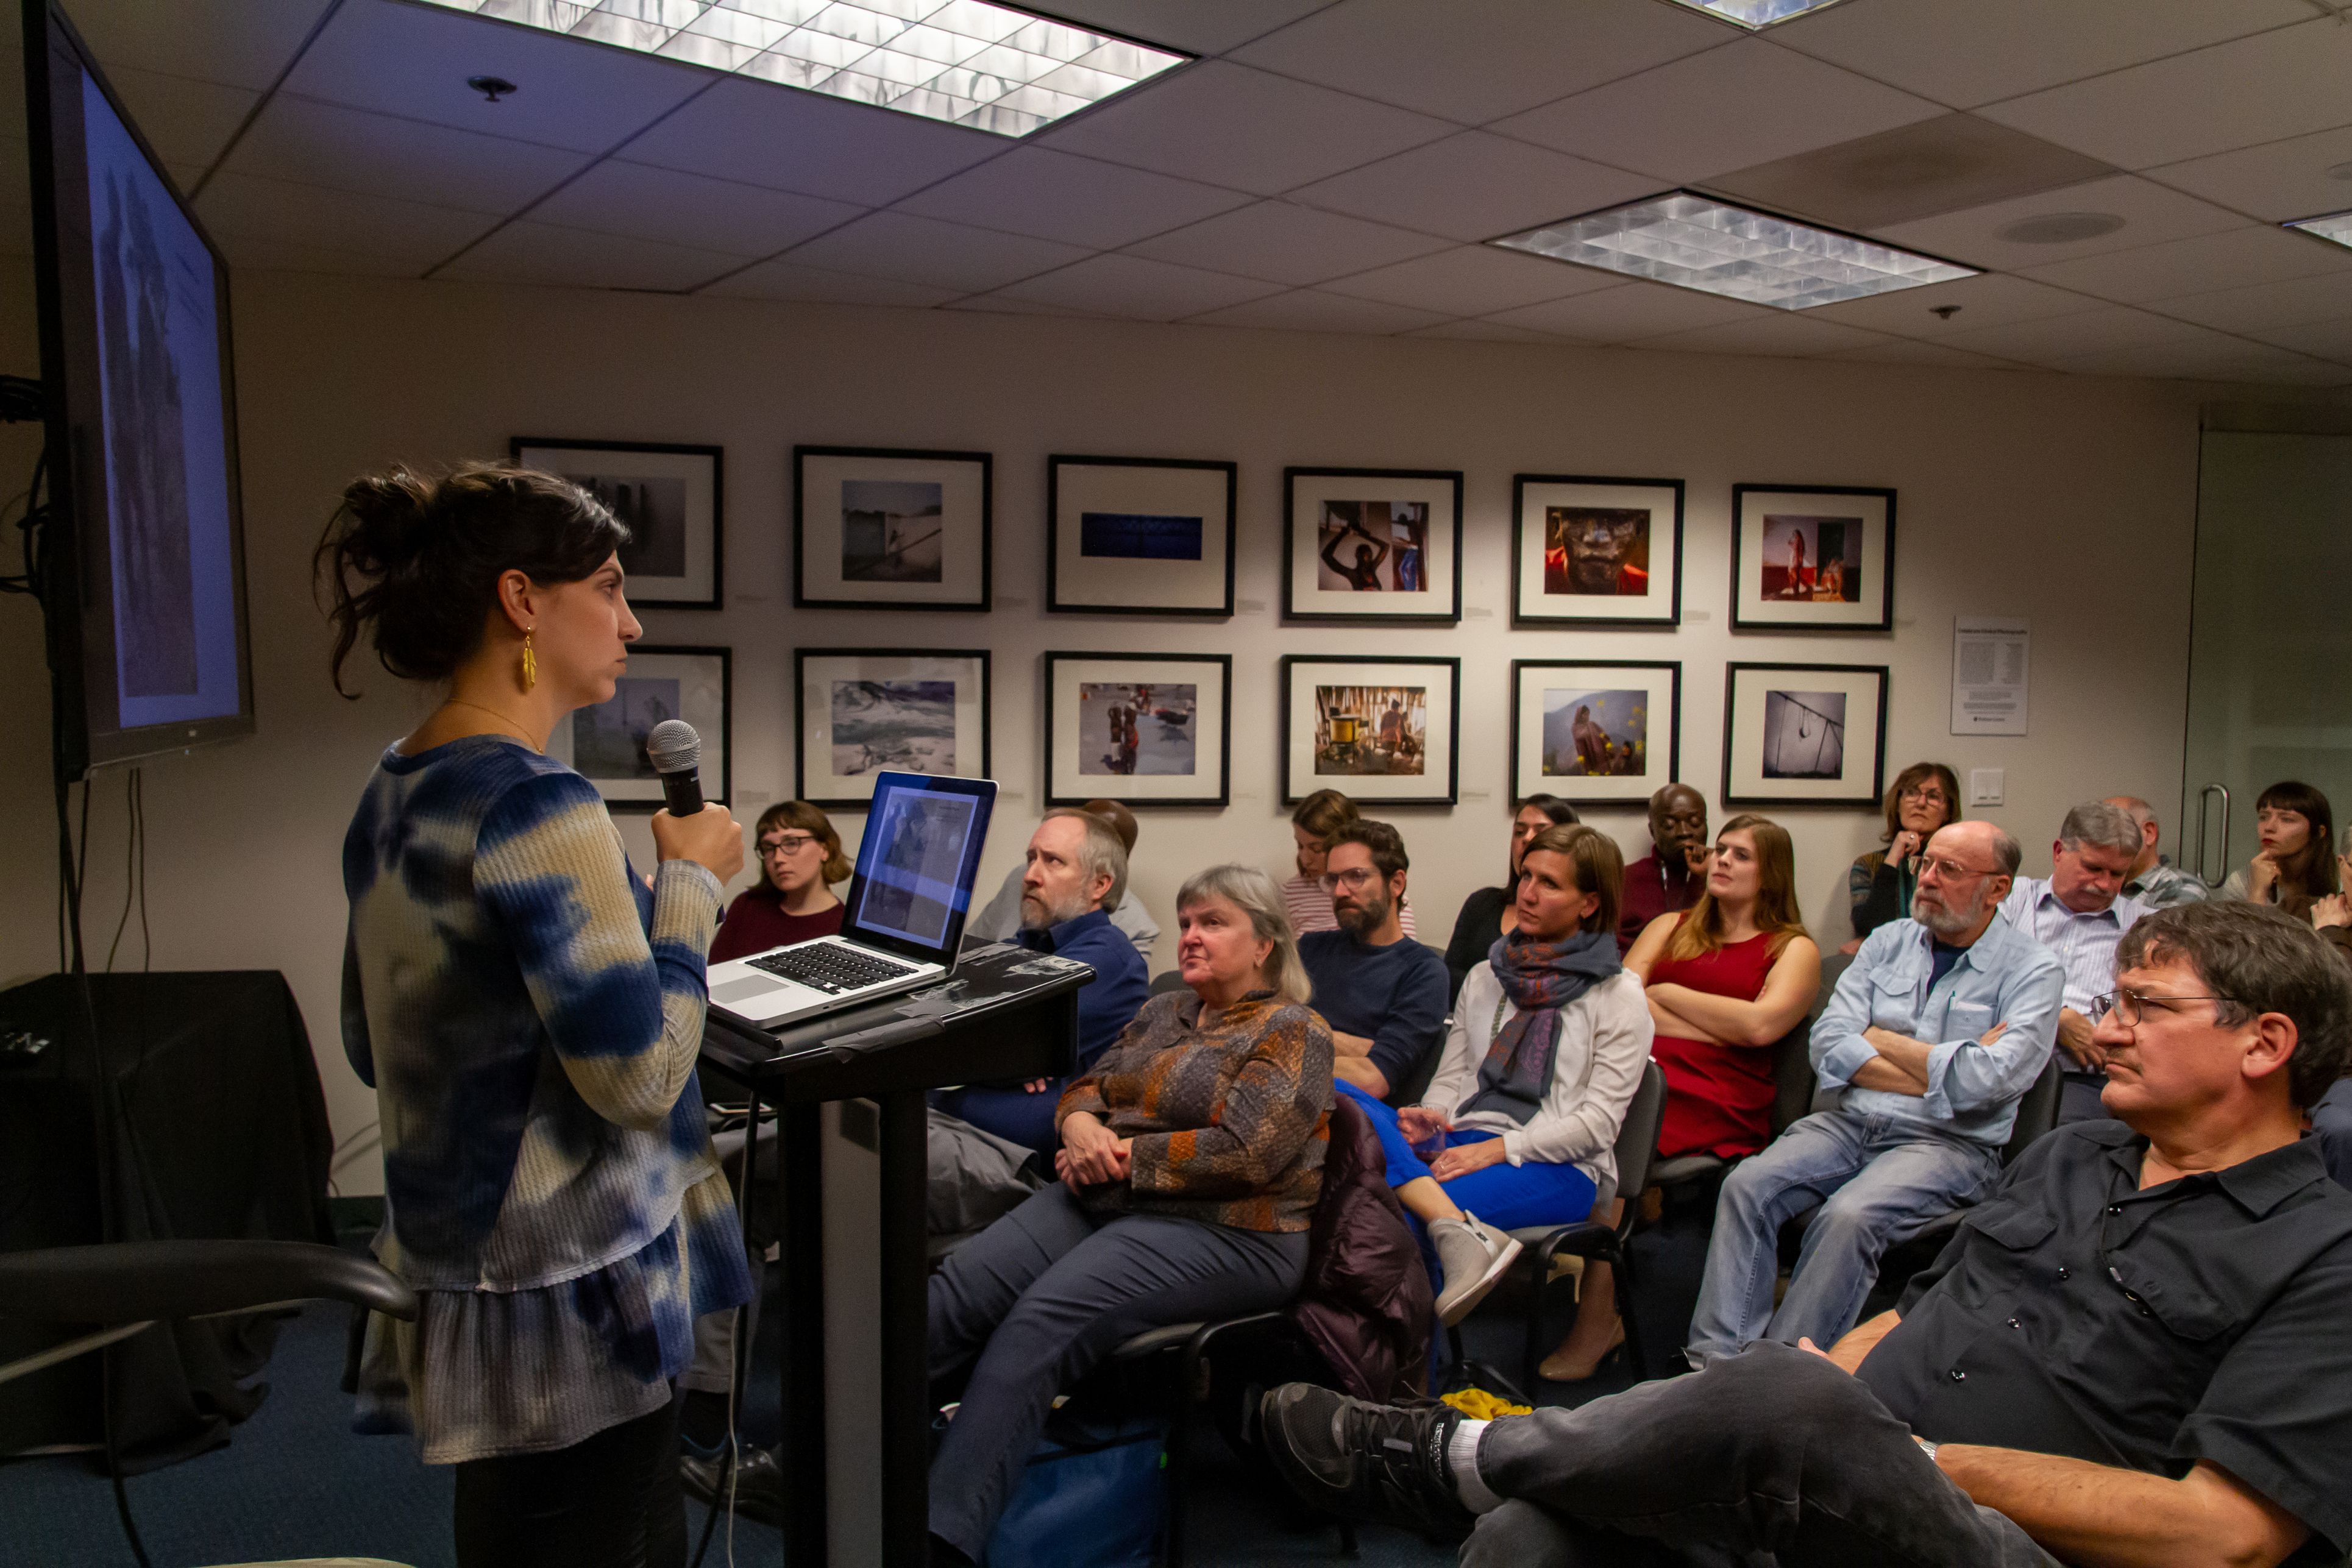 Grantee Mariana Palau speaks to the audience during her Talks @ Pulitzer discussion on Monday, February 3, 2020. Image by Claire Seaton. United States, 2020.